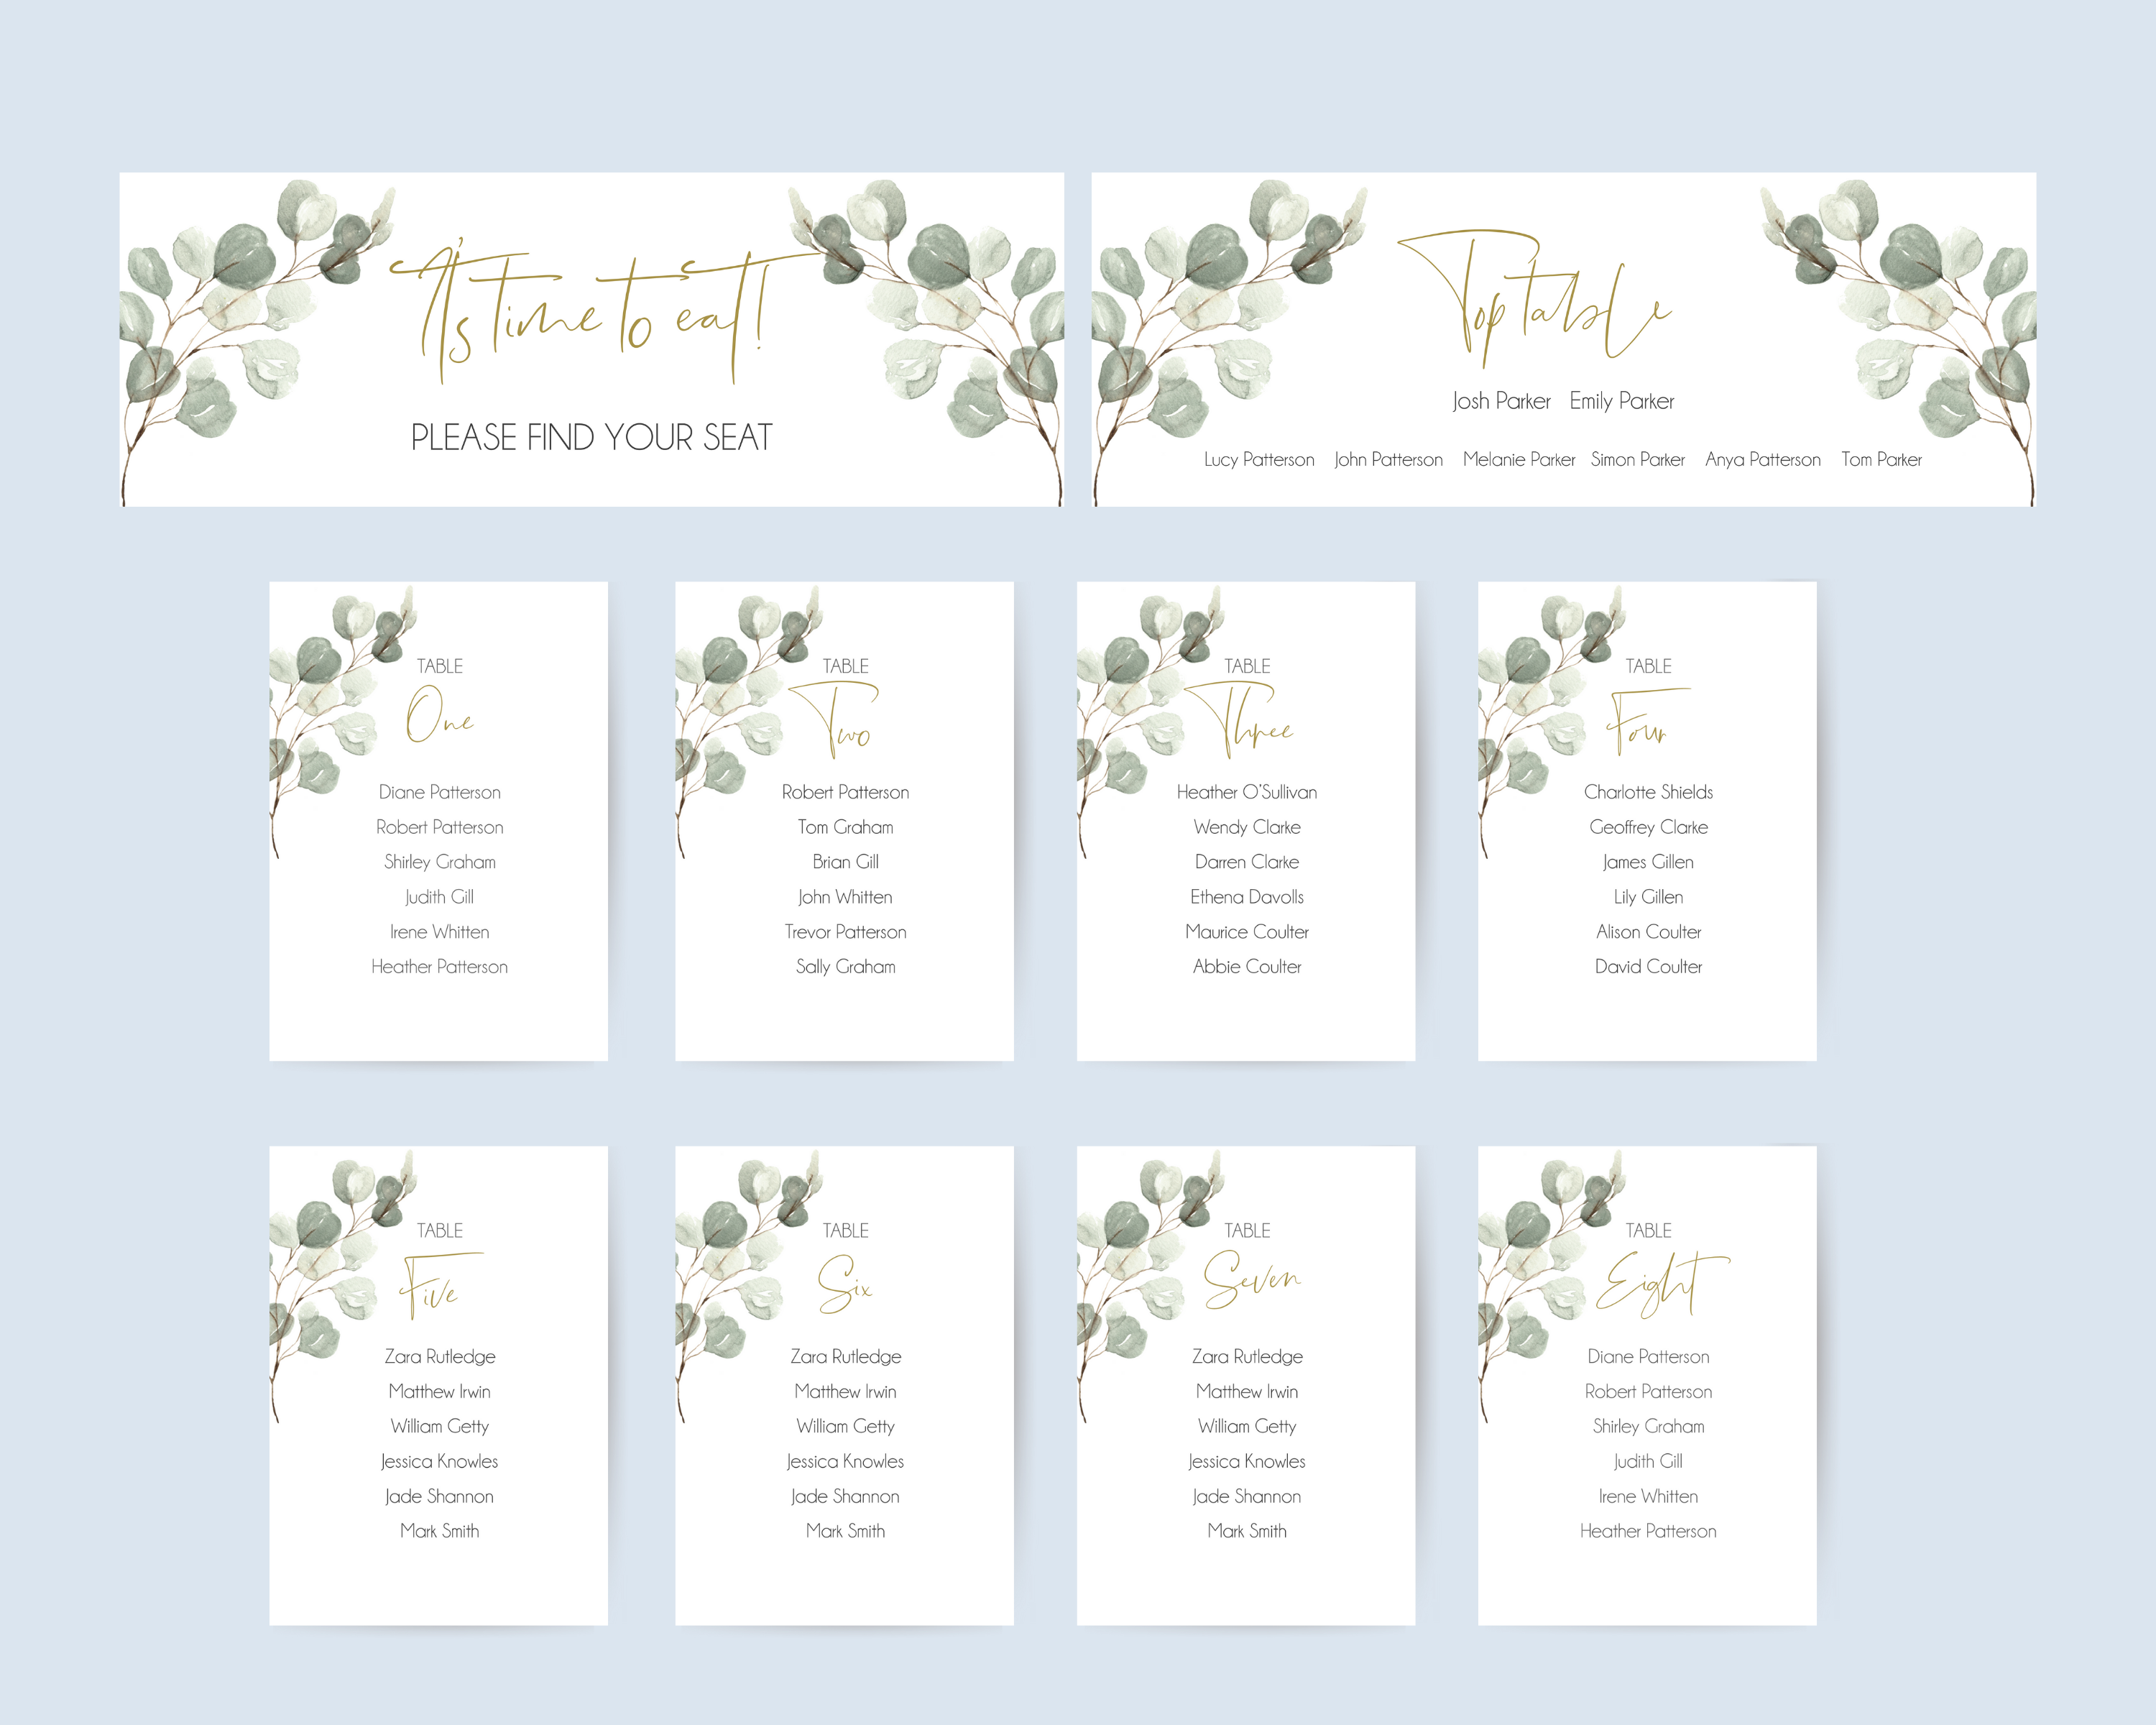 A set of Poppleberry watercolour eucalyptus wedding table plan cards, including 'top table', 'find your seat' and 'A6 table' cards, on plain background.